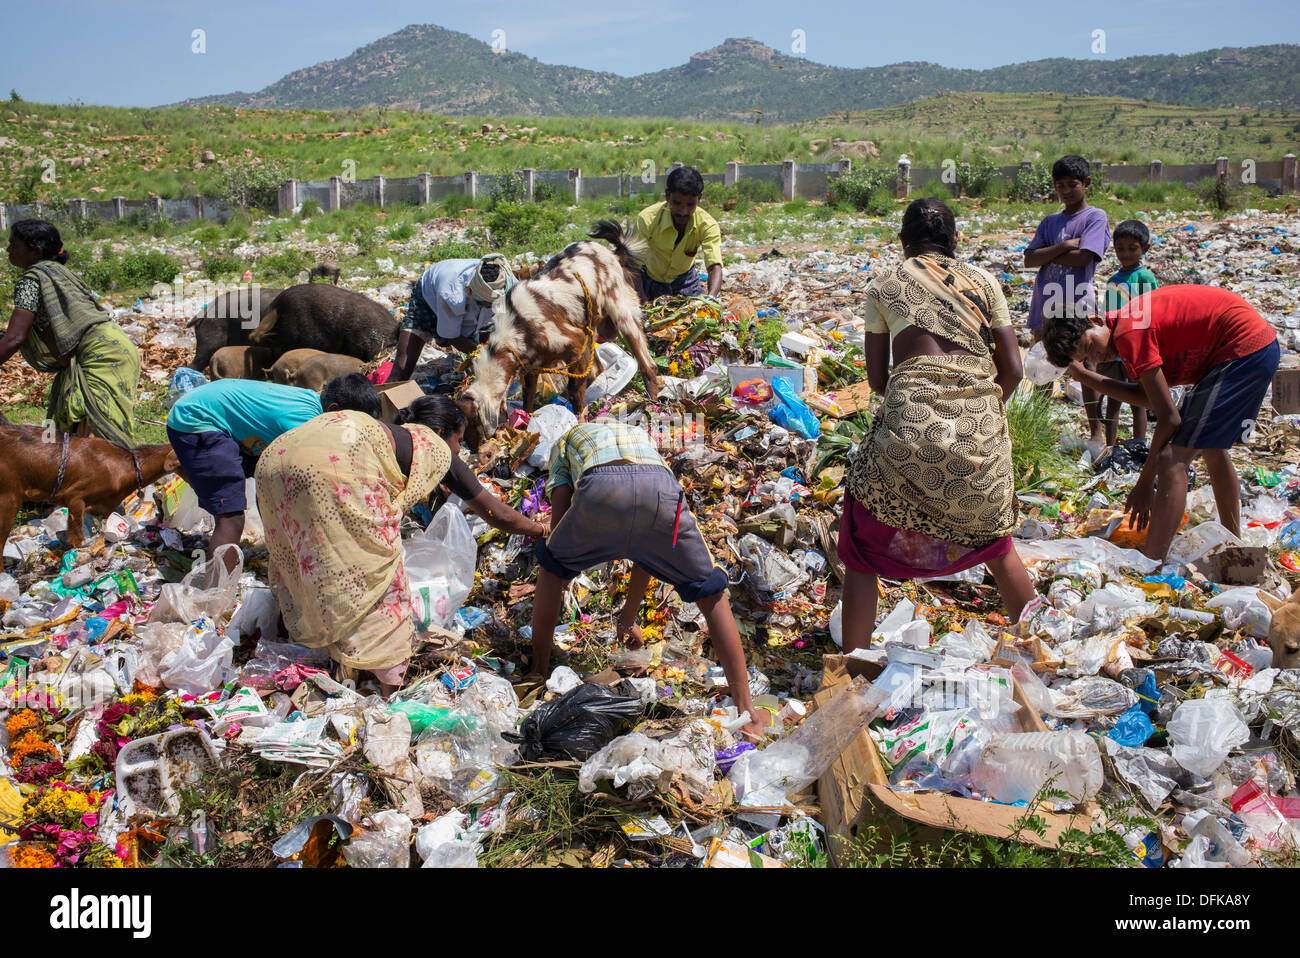 Poor Indian women and children collecting pickings from a rubbish tip. Andhra Pradesh, India Stock Photo